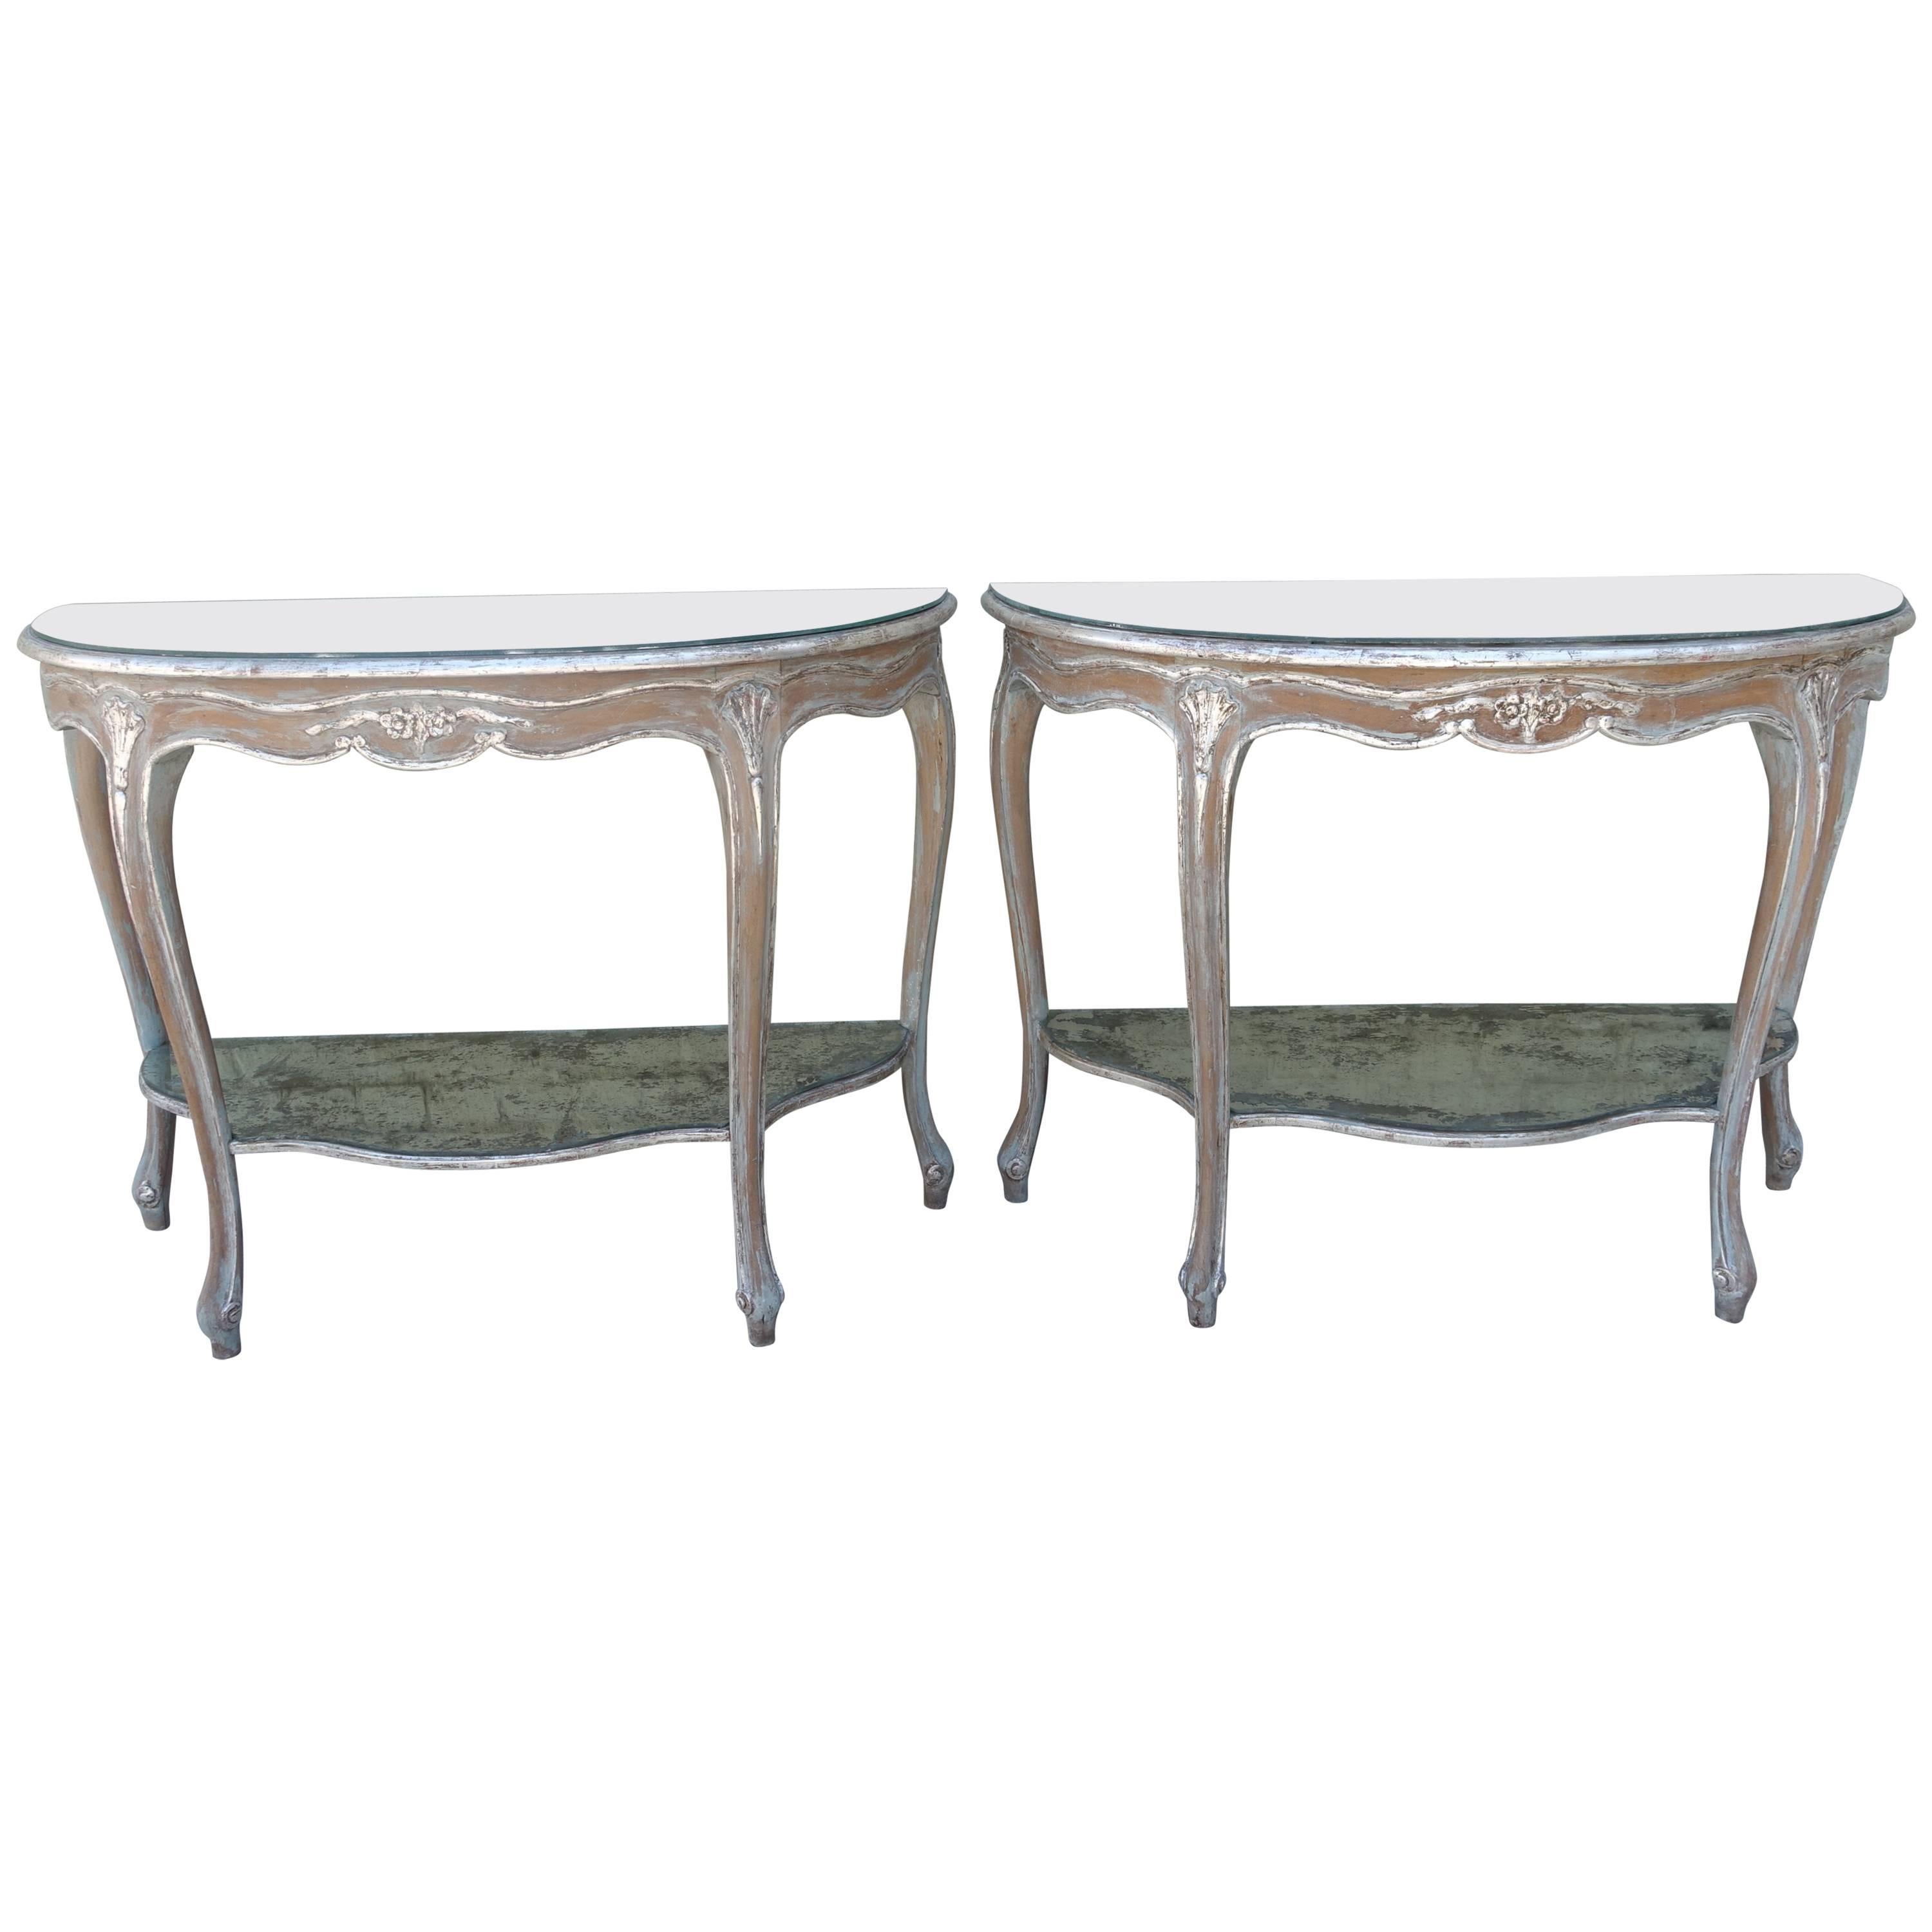 Pair of French Painted and Silver Gilt Consoles with Mirrored Tops